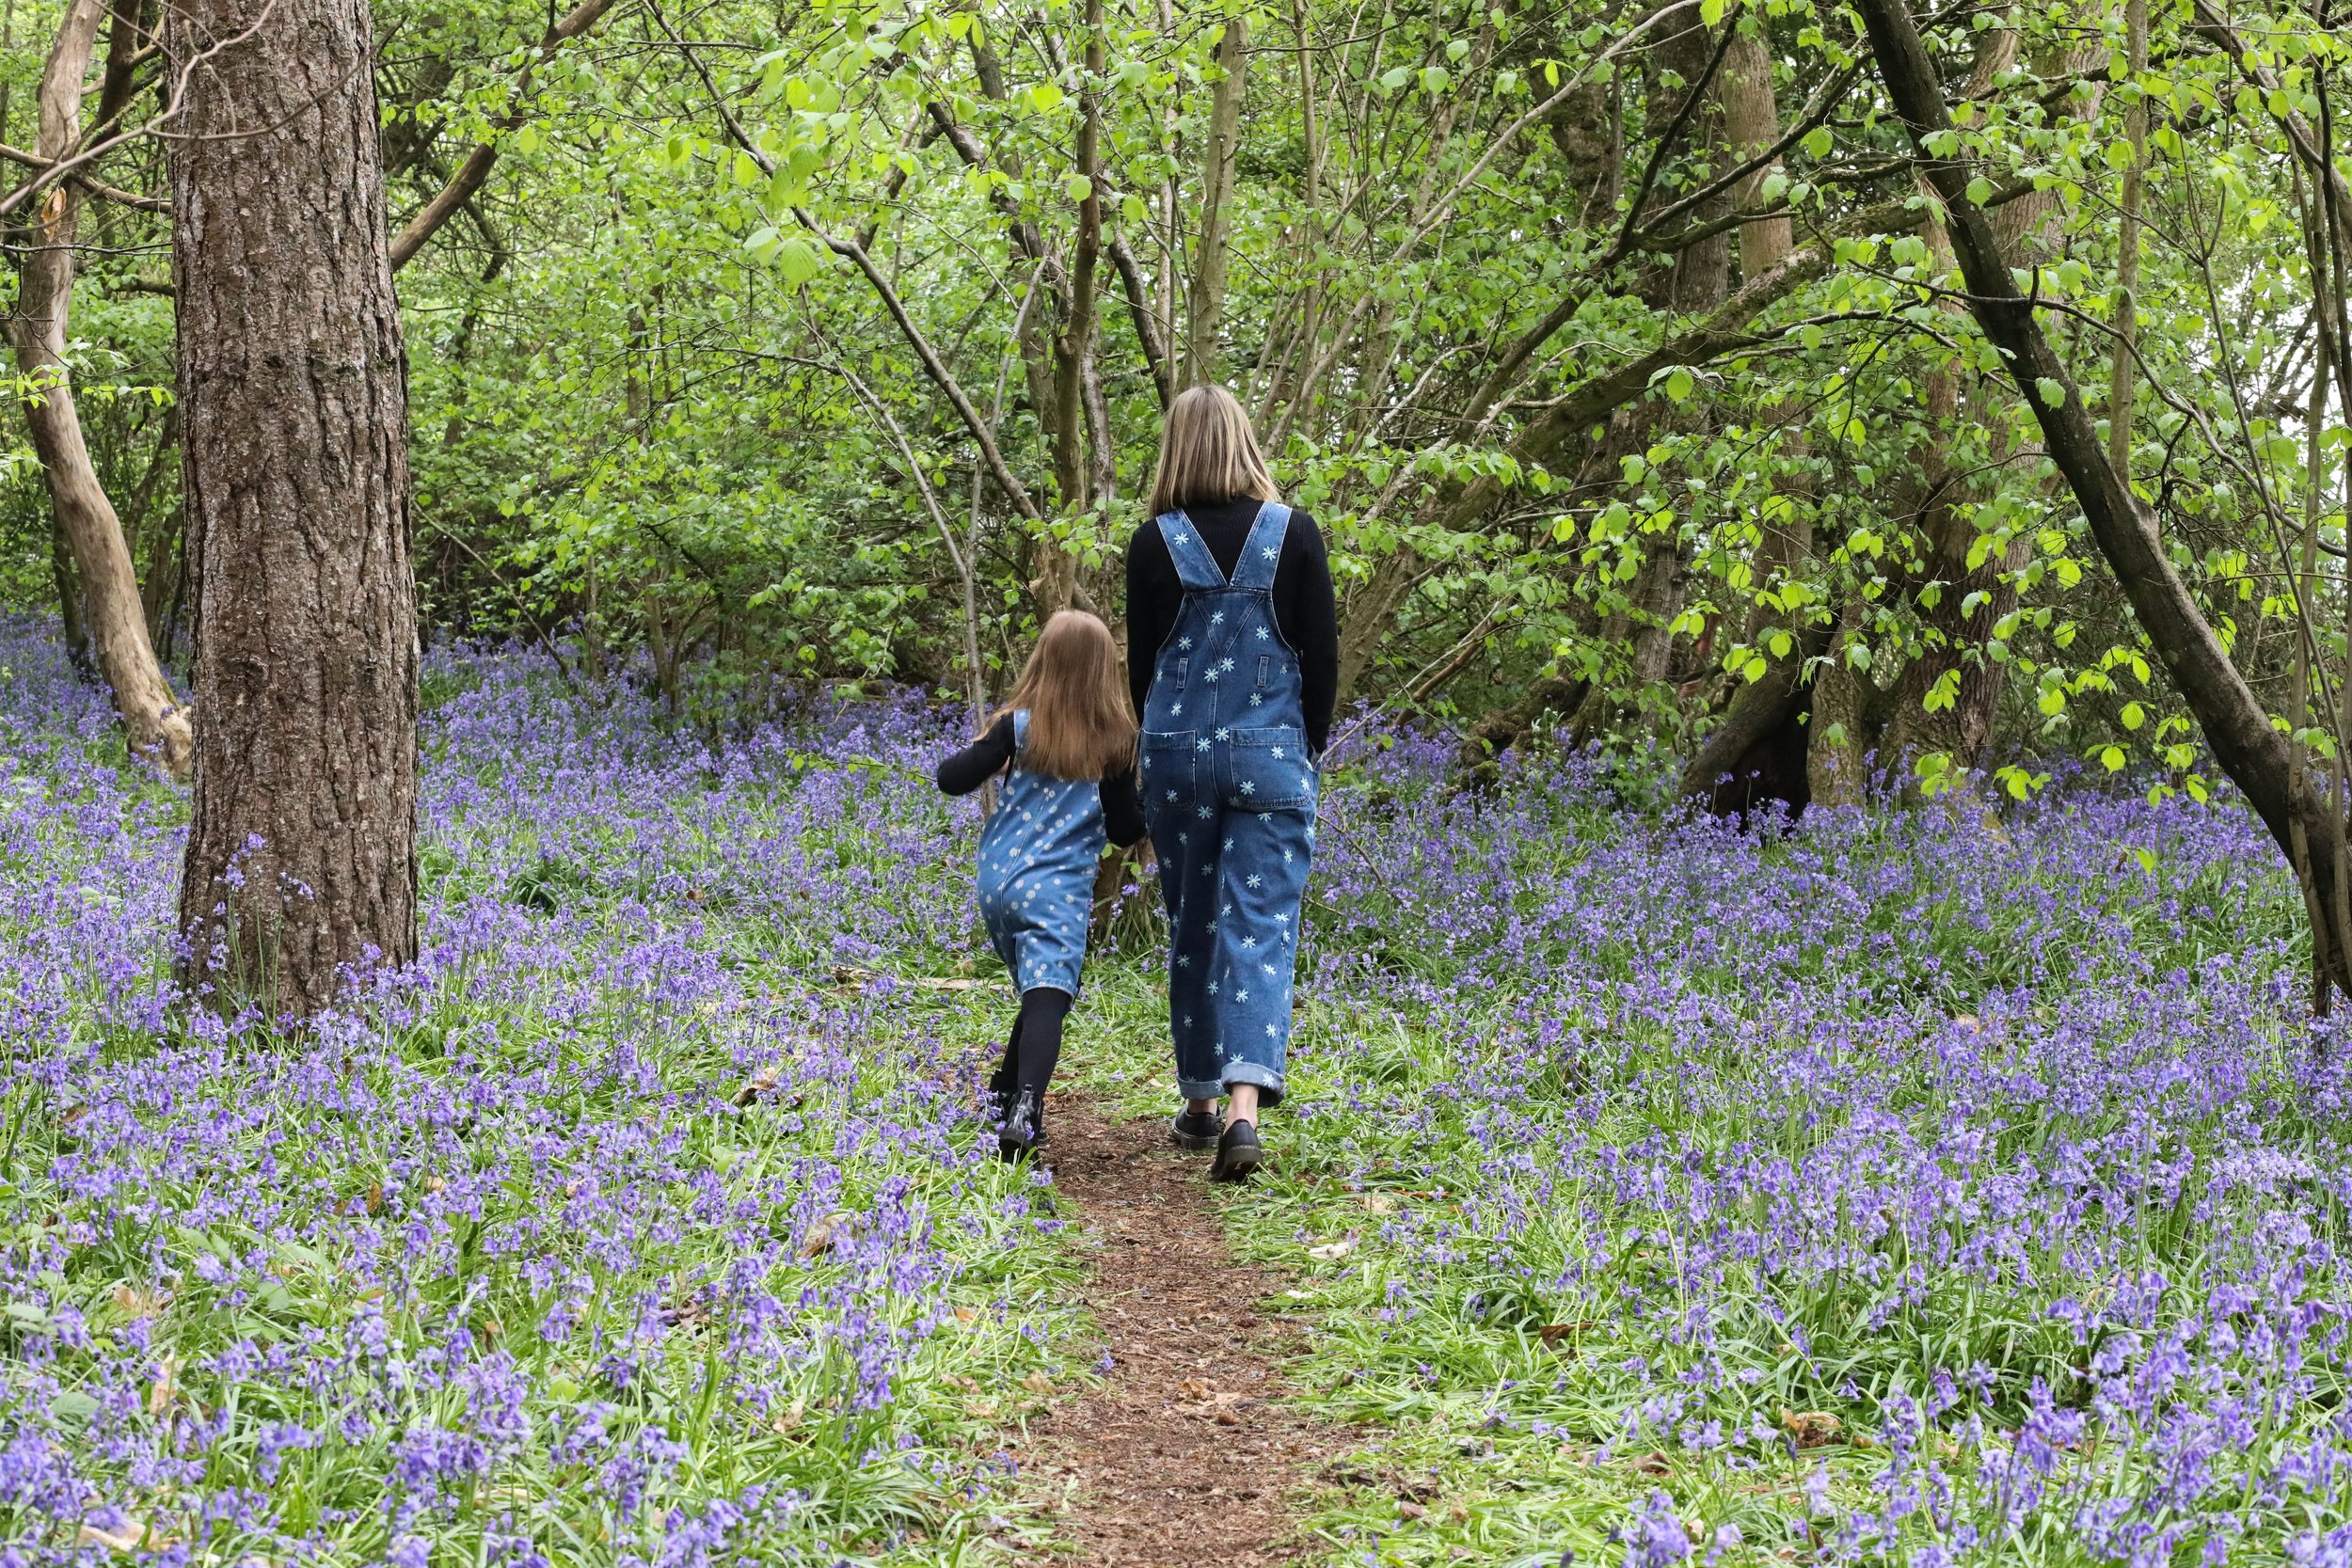 MUM AND DAUGHTER PHOTO SHOOT IN THE BLUEBELLS | BERKSHIRE PORTRAIT SHOOTS14 choice .JPG